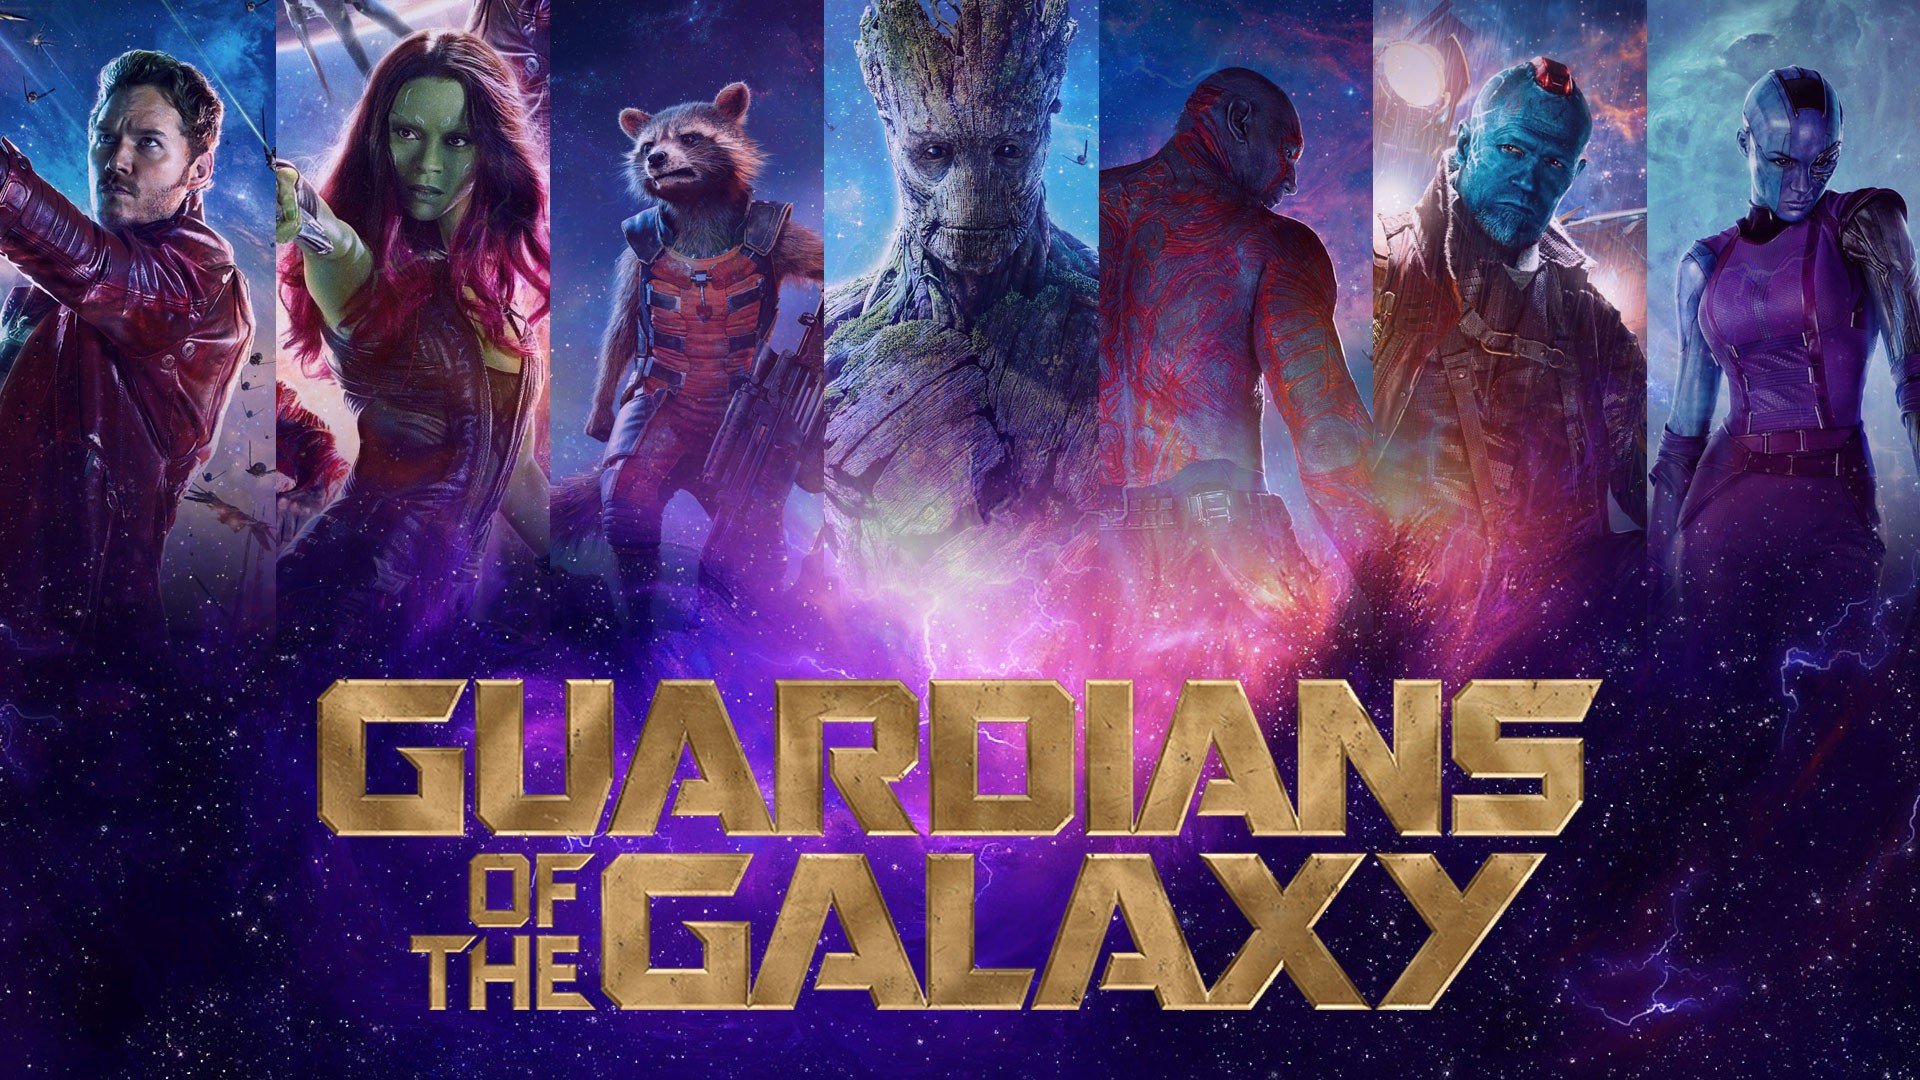 Star Lord, Gamora, Rocket Raccoon, Drax the Destroyer, Yondu Udonta, Guardians of the Galaxy, Marvel Cinematic Universe, The Groot, Nebula Wallpaper